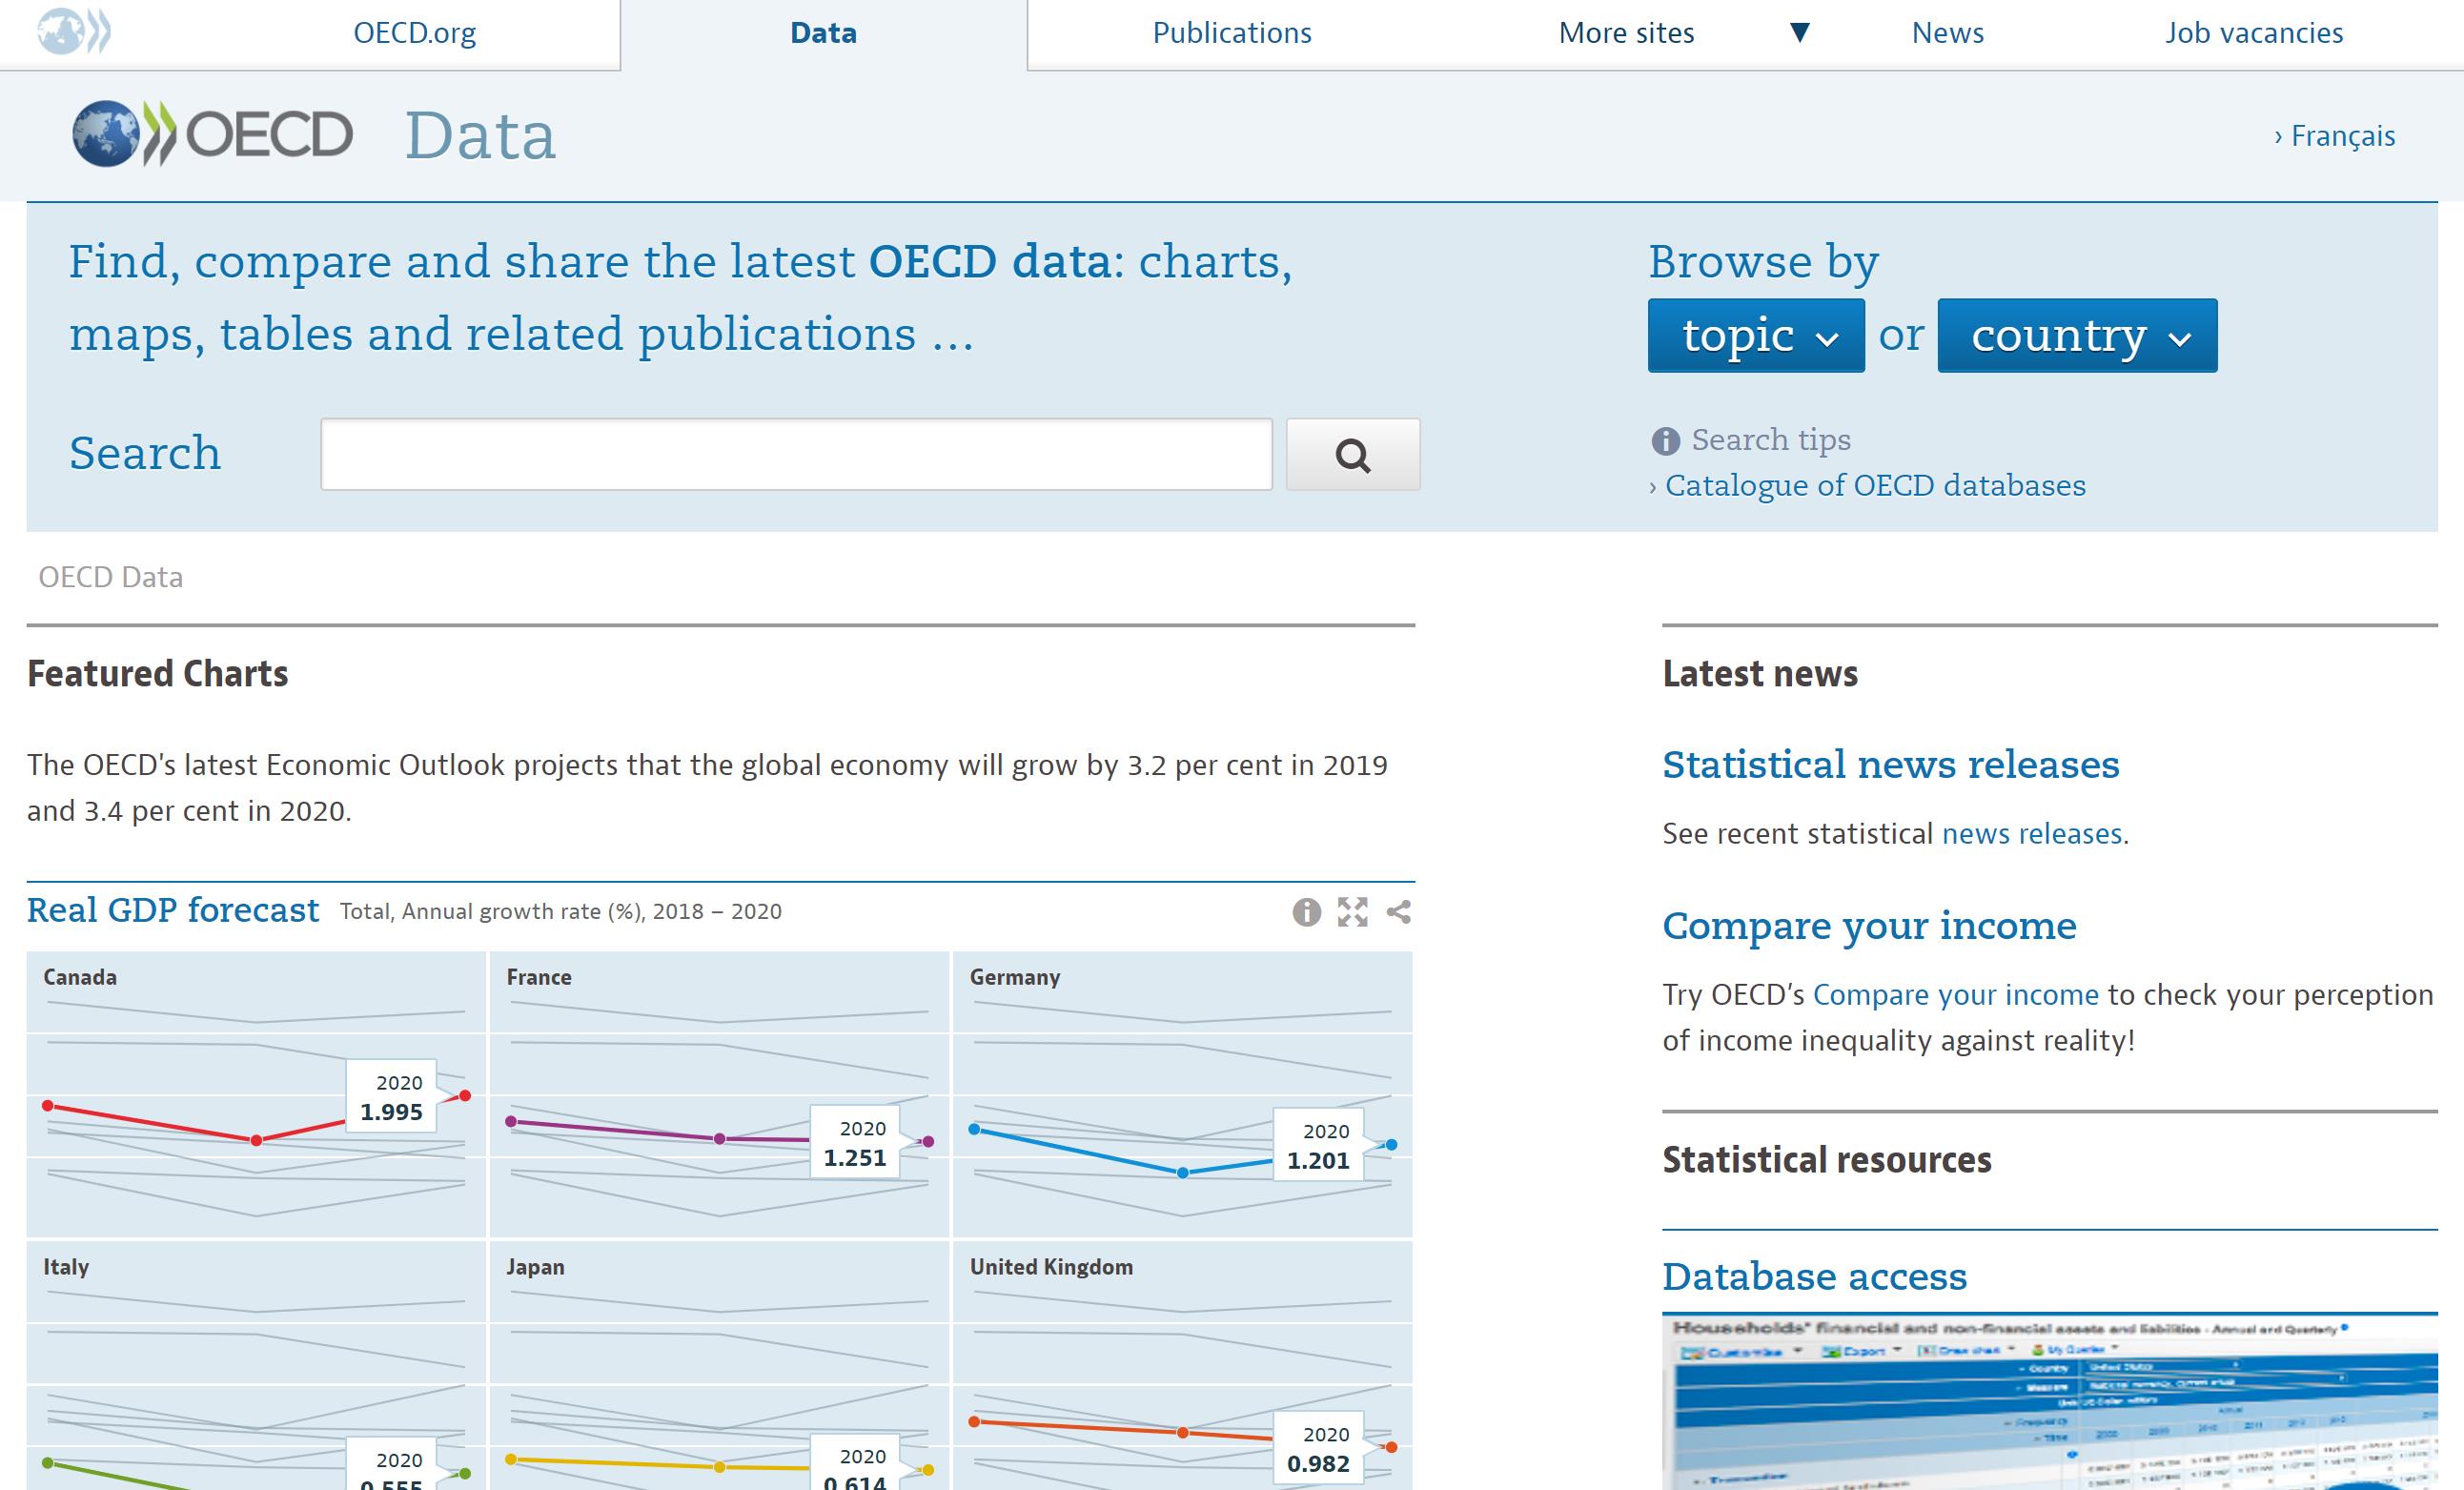 Screenshot of the OECD Data main page. There is a search bar on the left, and there are two filters on the right.